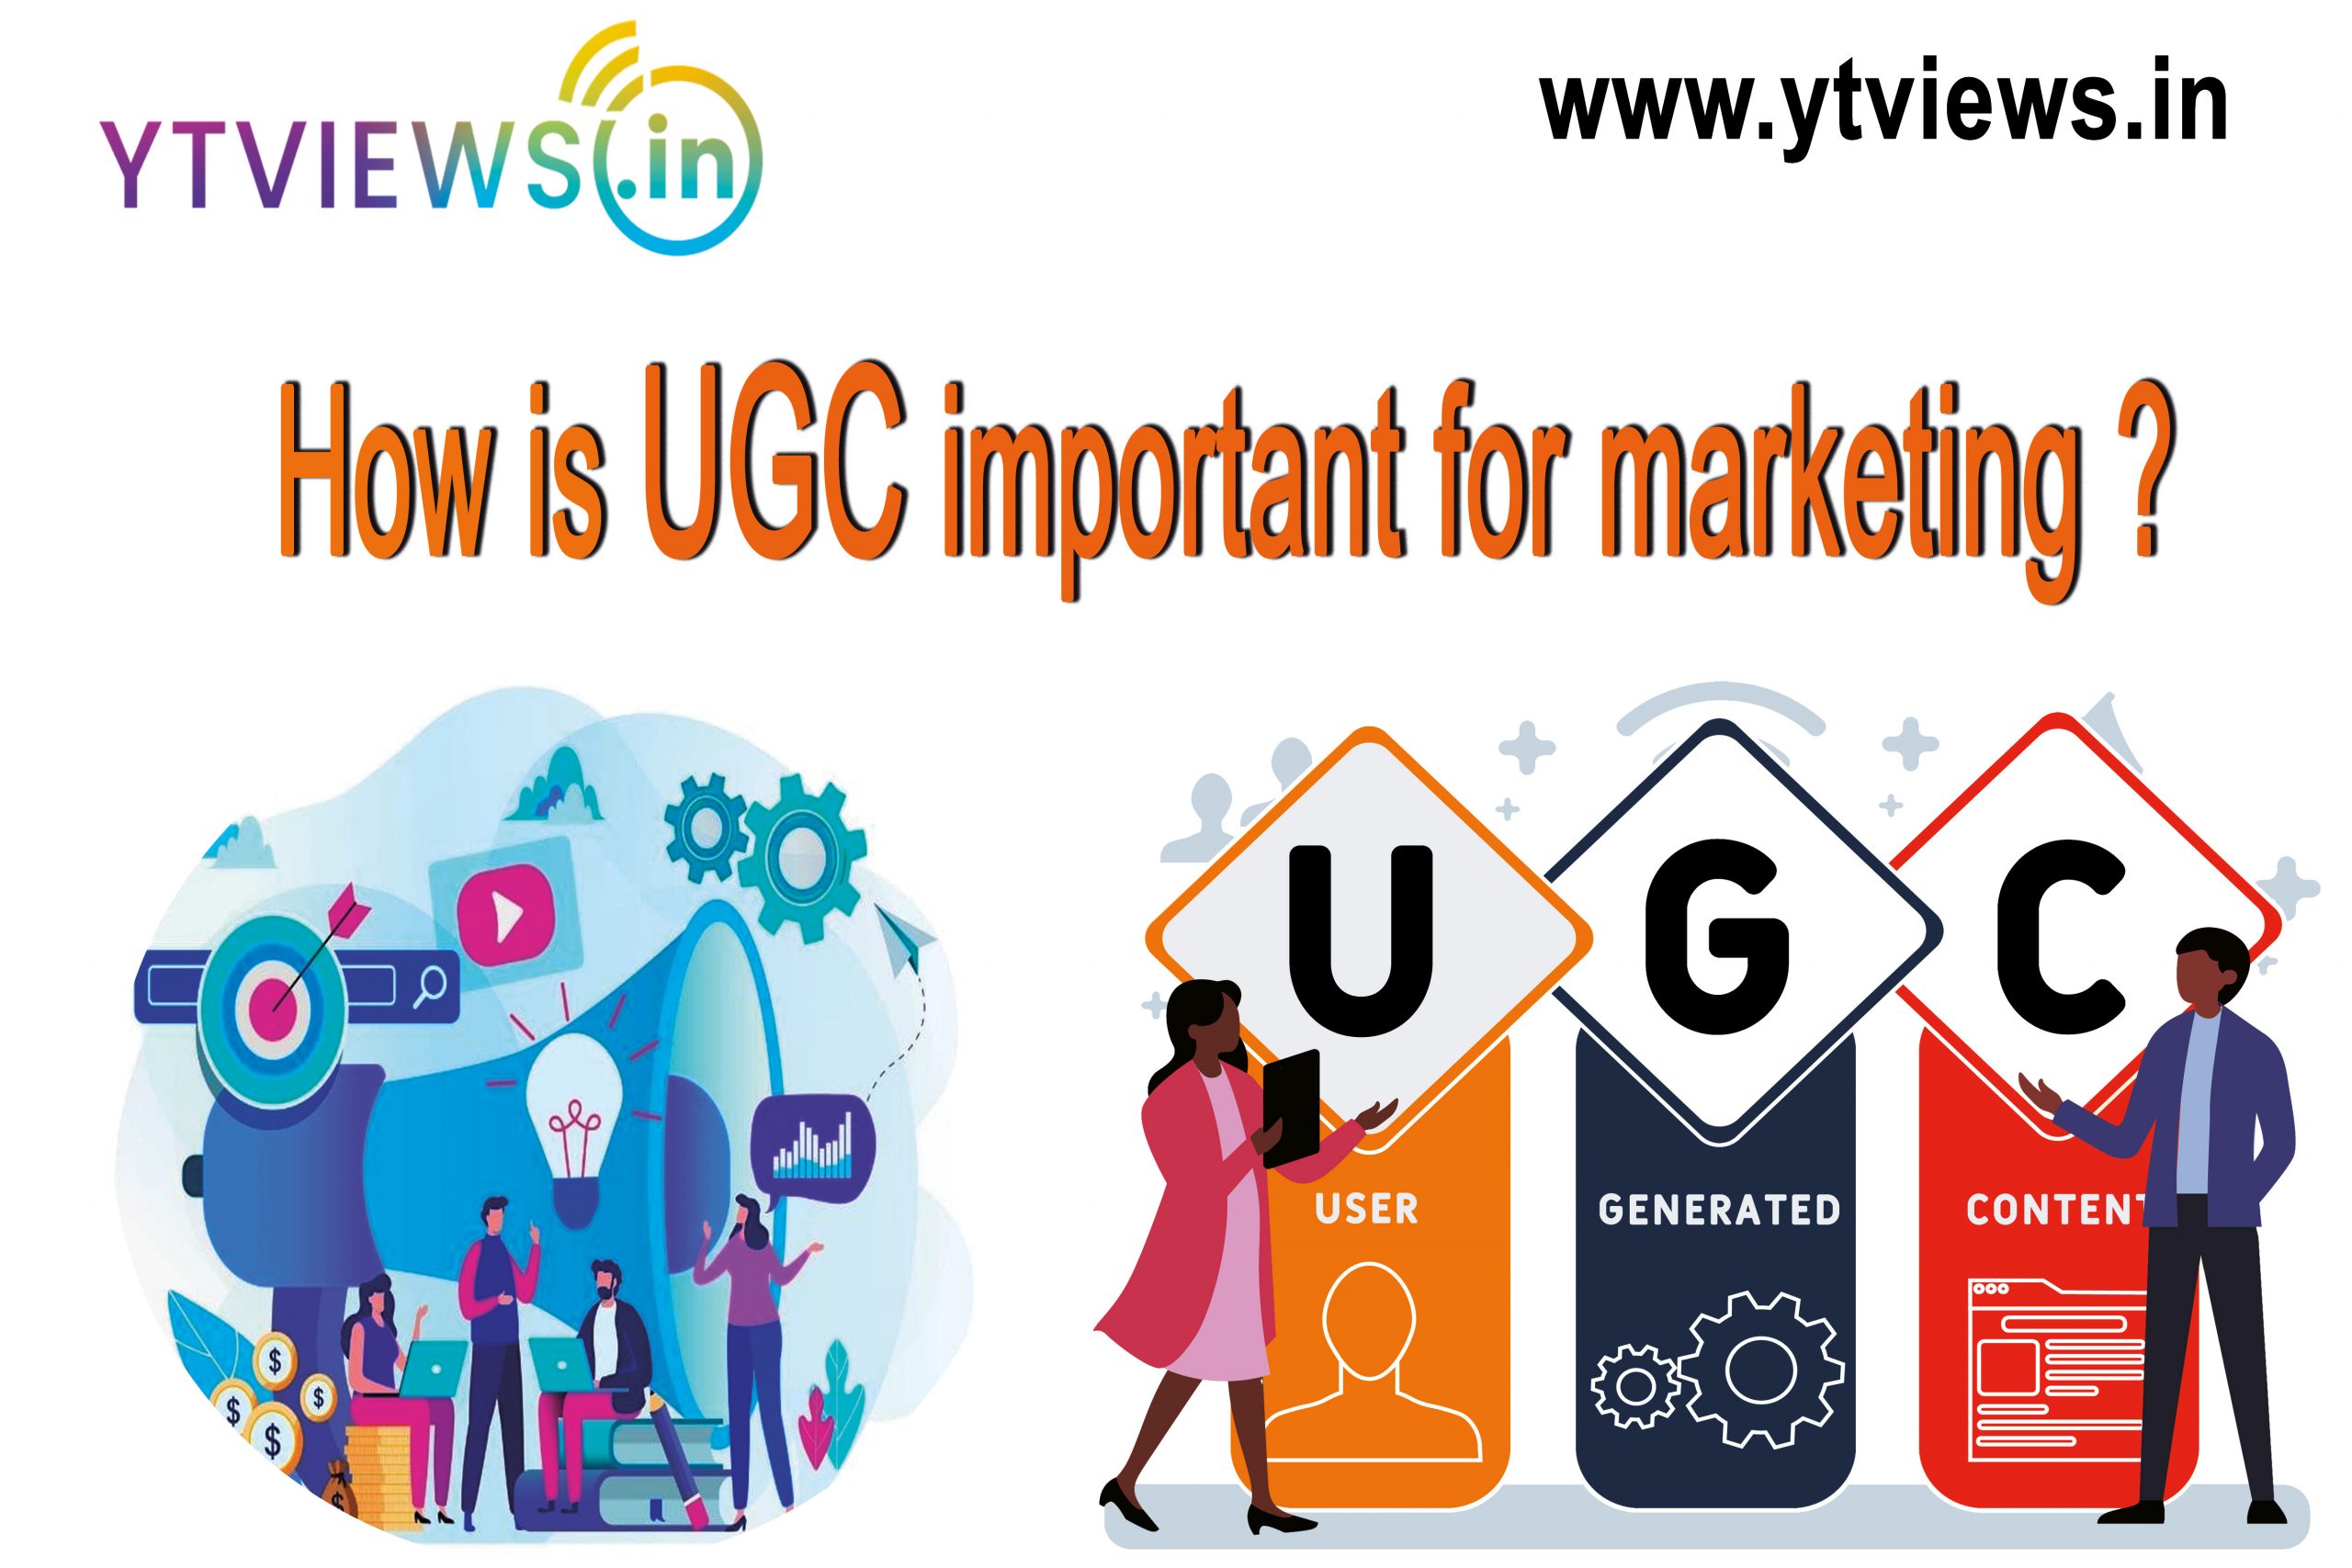 How is UGC important for Marketing?